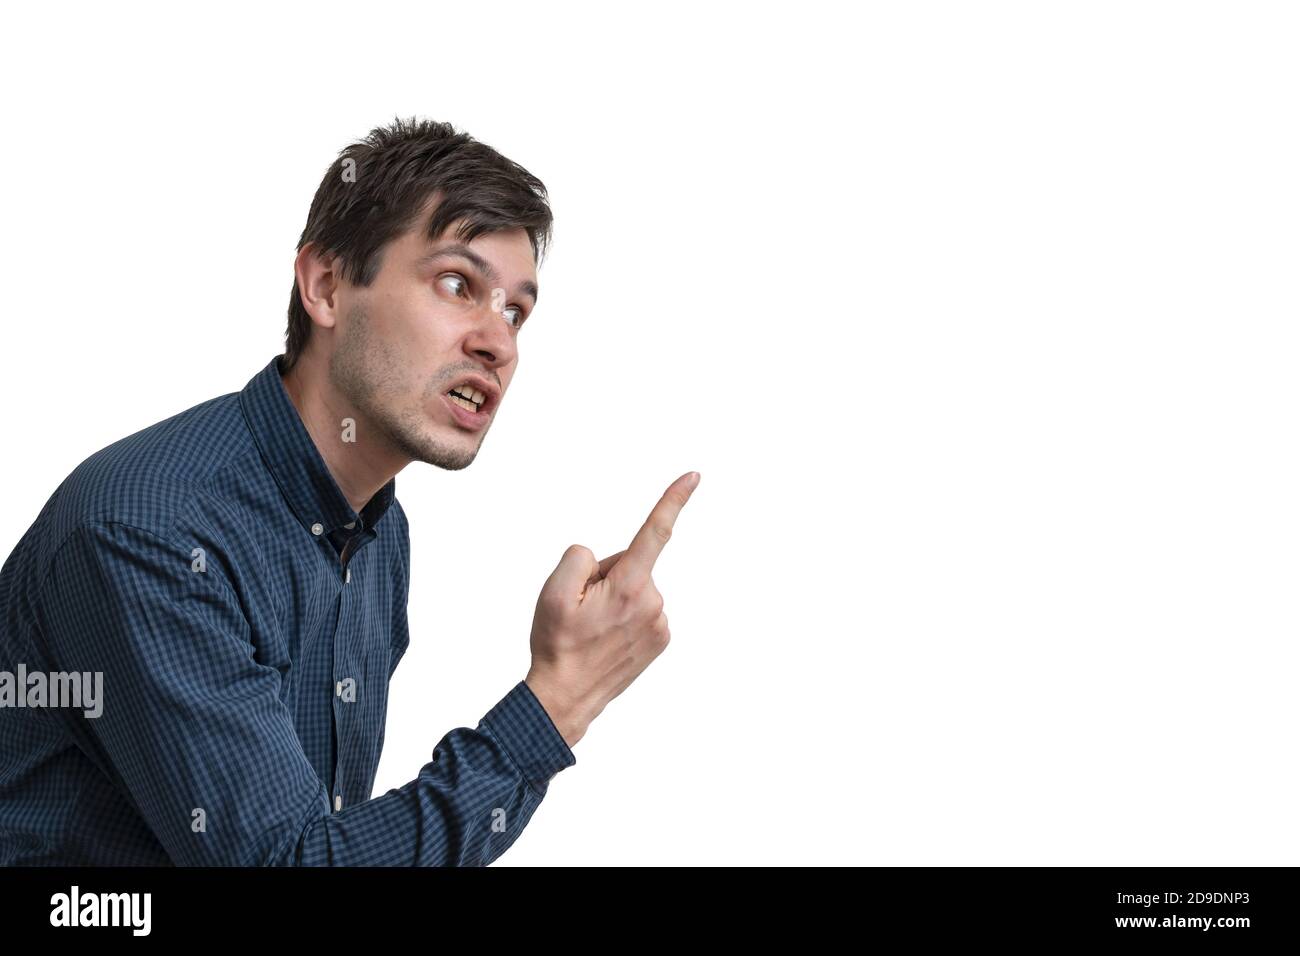 Young angry man threatening with finger isolated on white background. Side view. Stock Photo